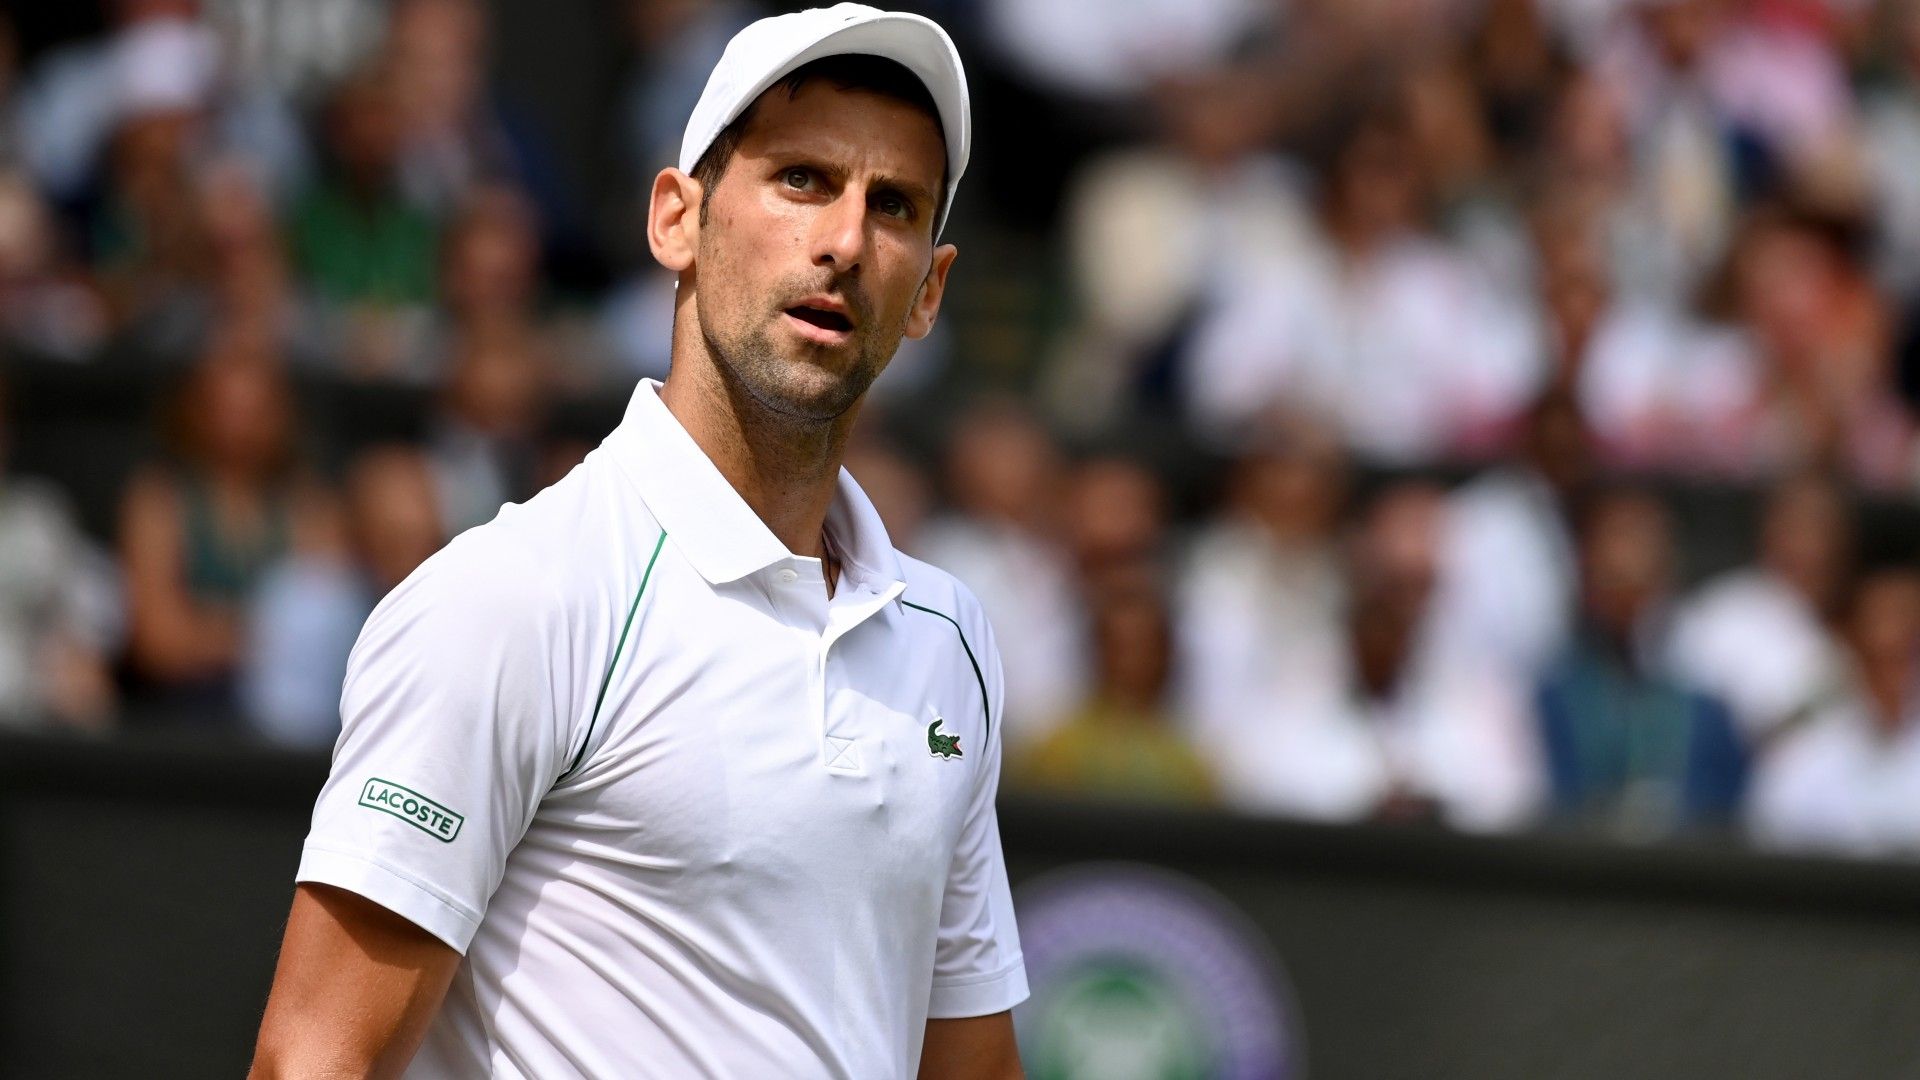 Novak Djokovic's future at US, Australian Opens remains up in the air